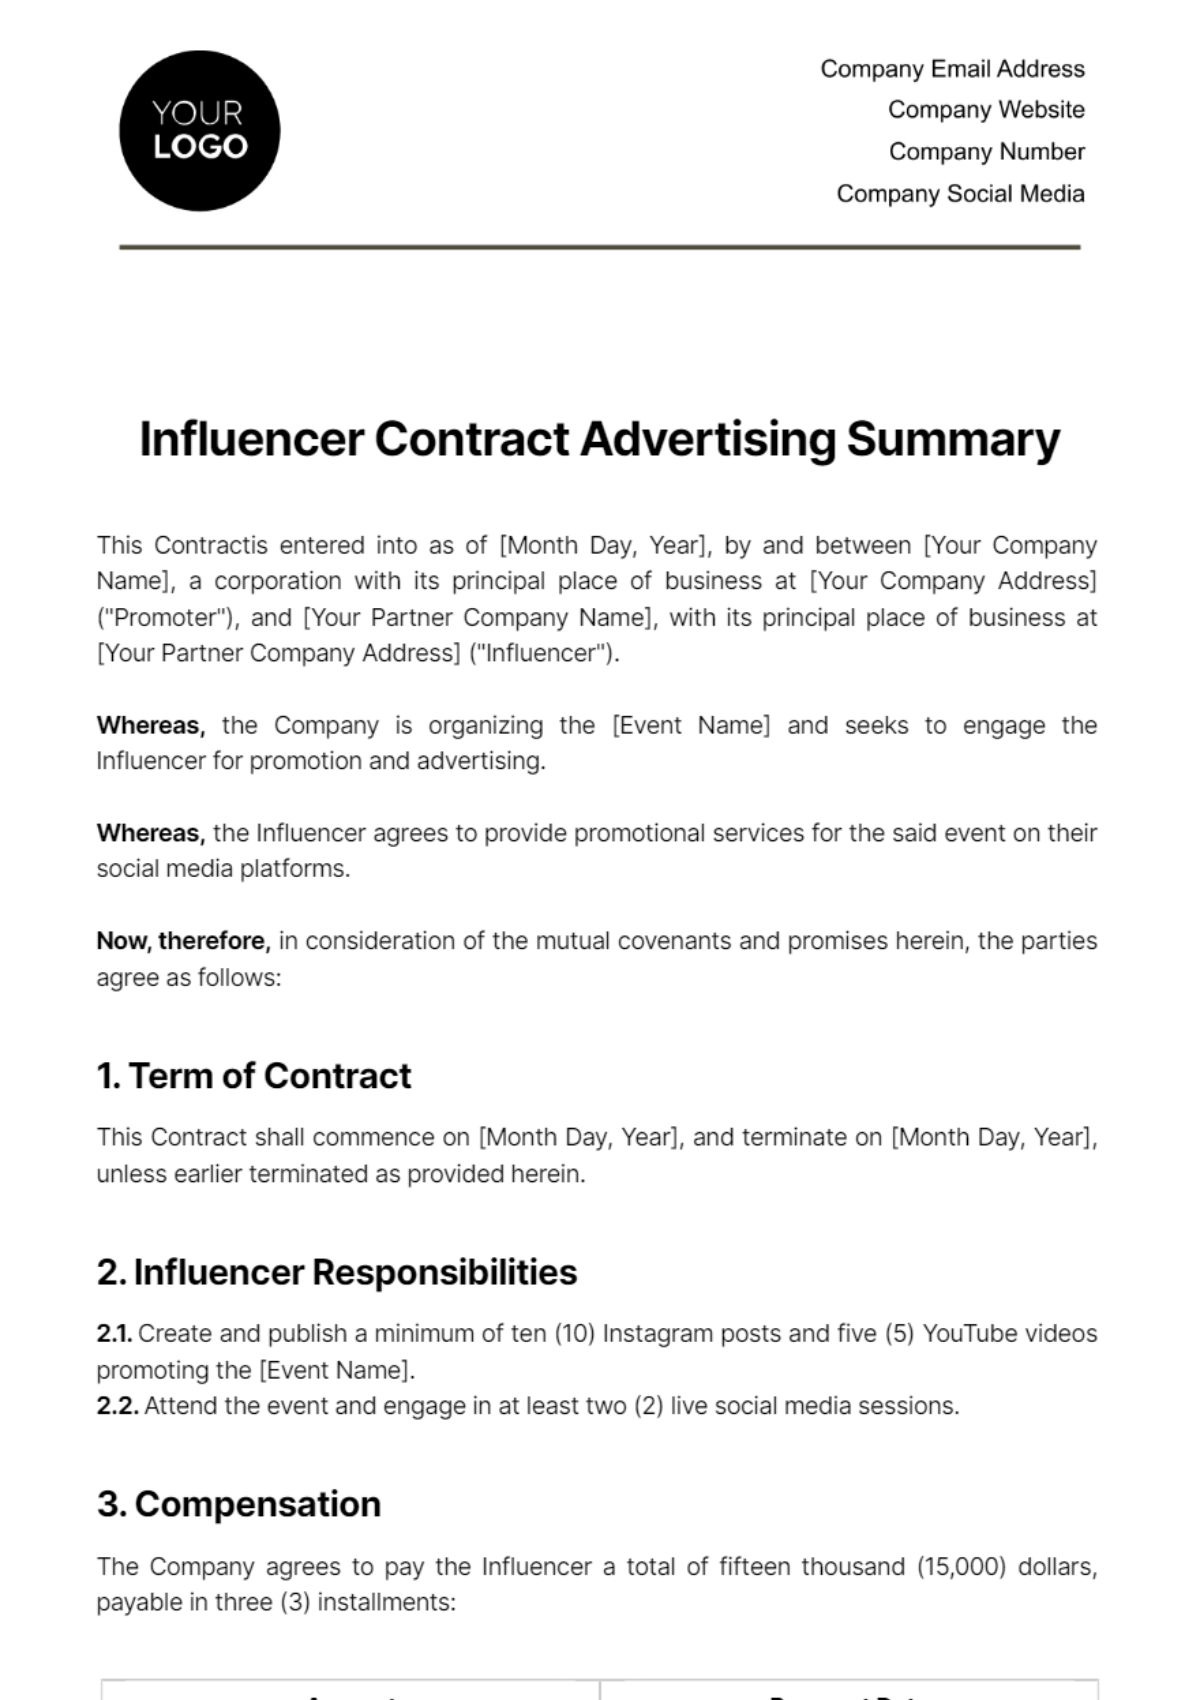 Influencer Contract Advertising Summary Template